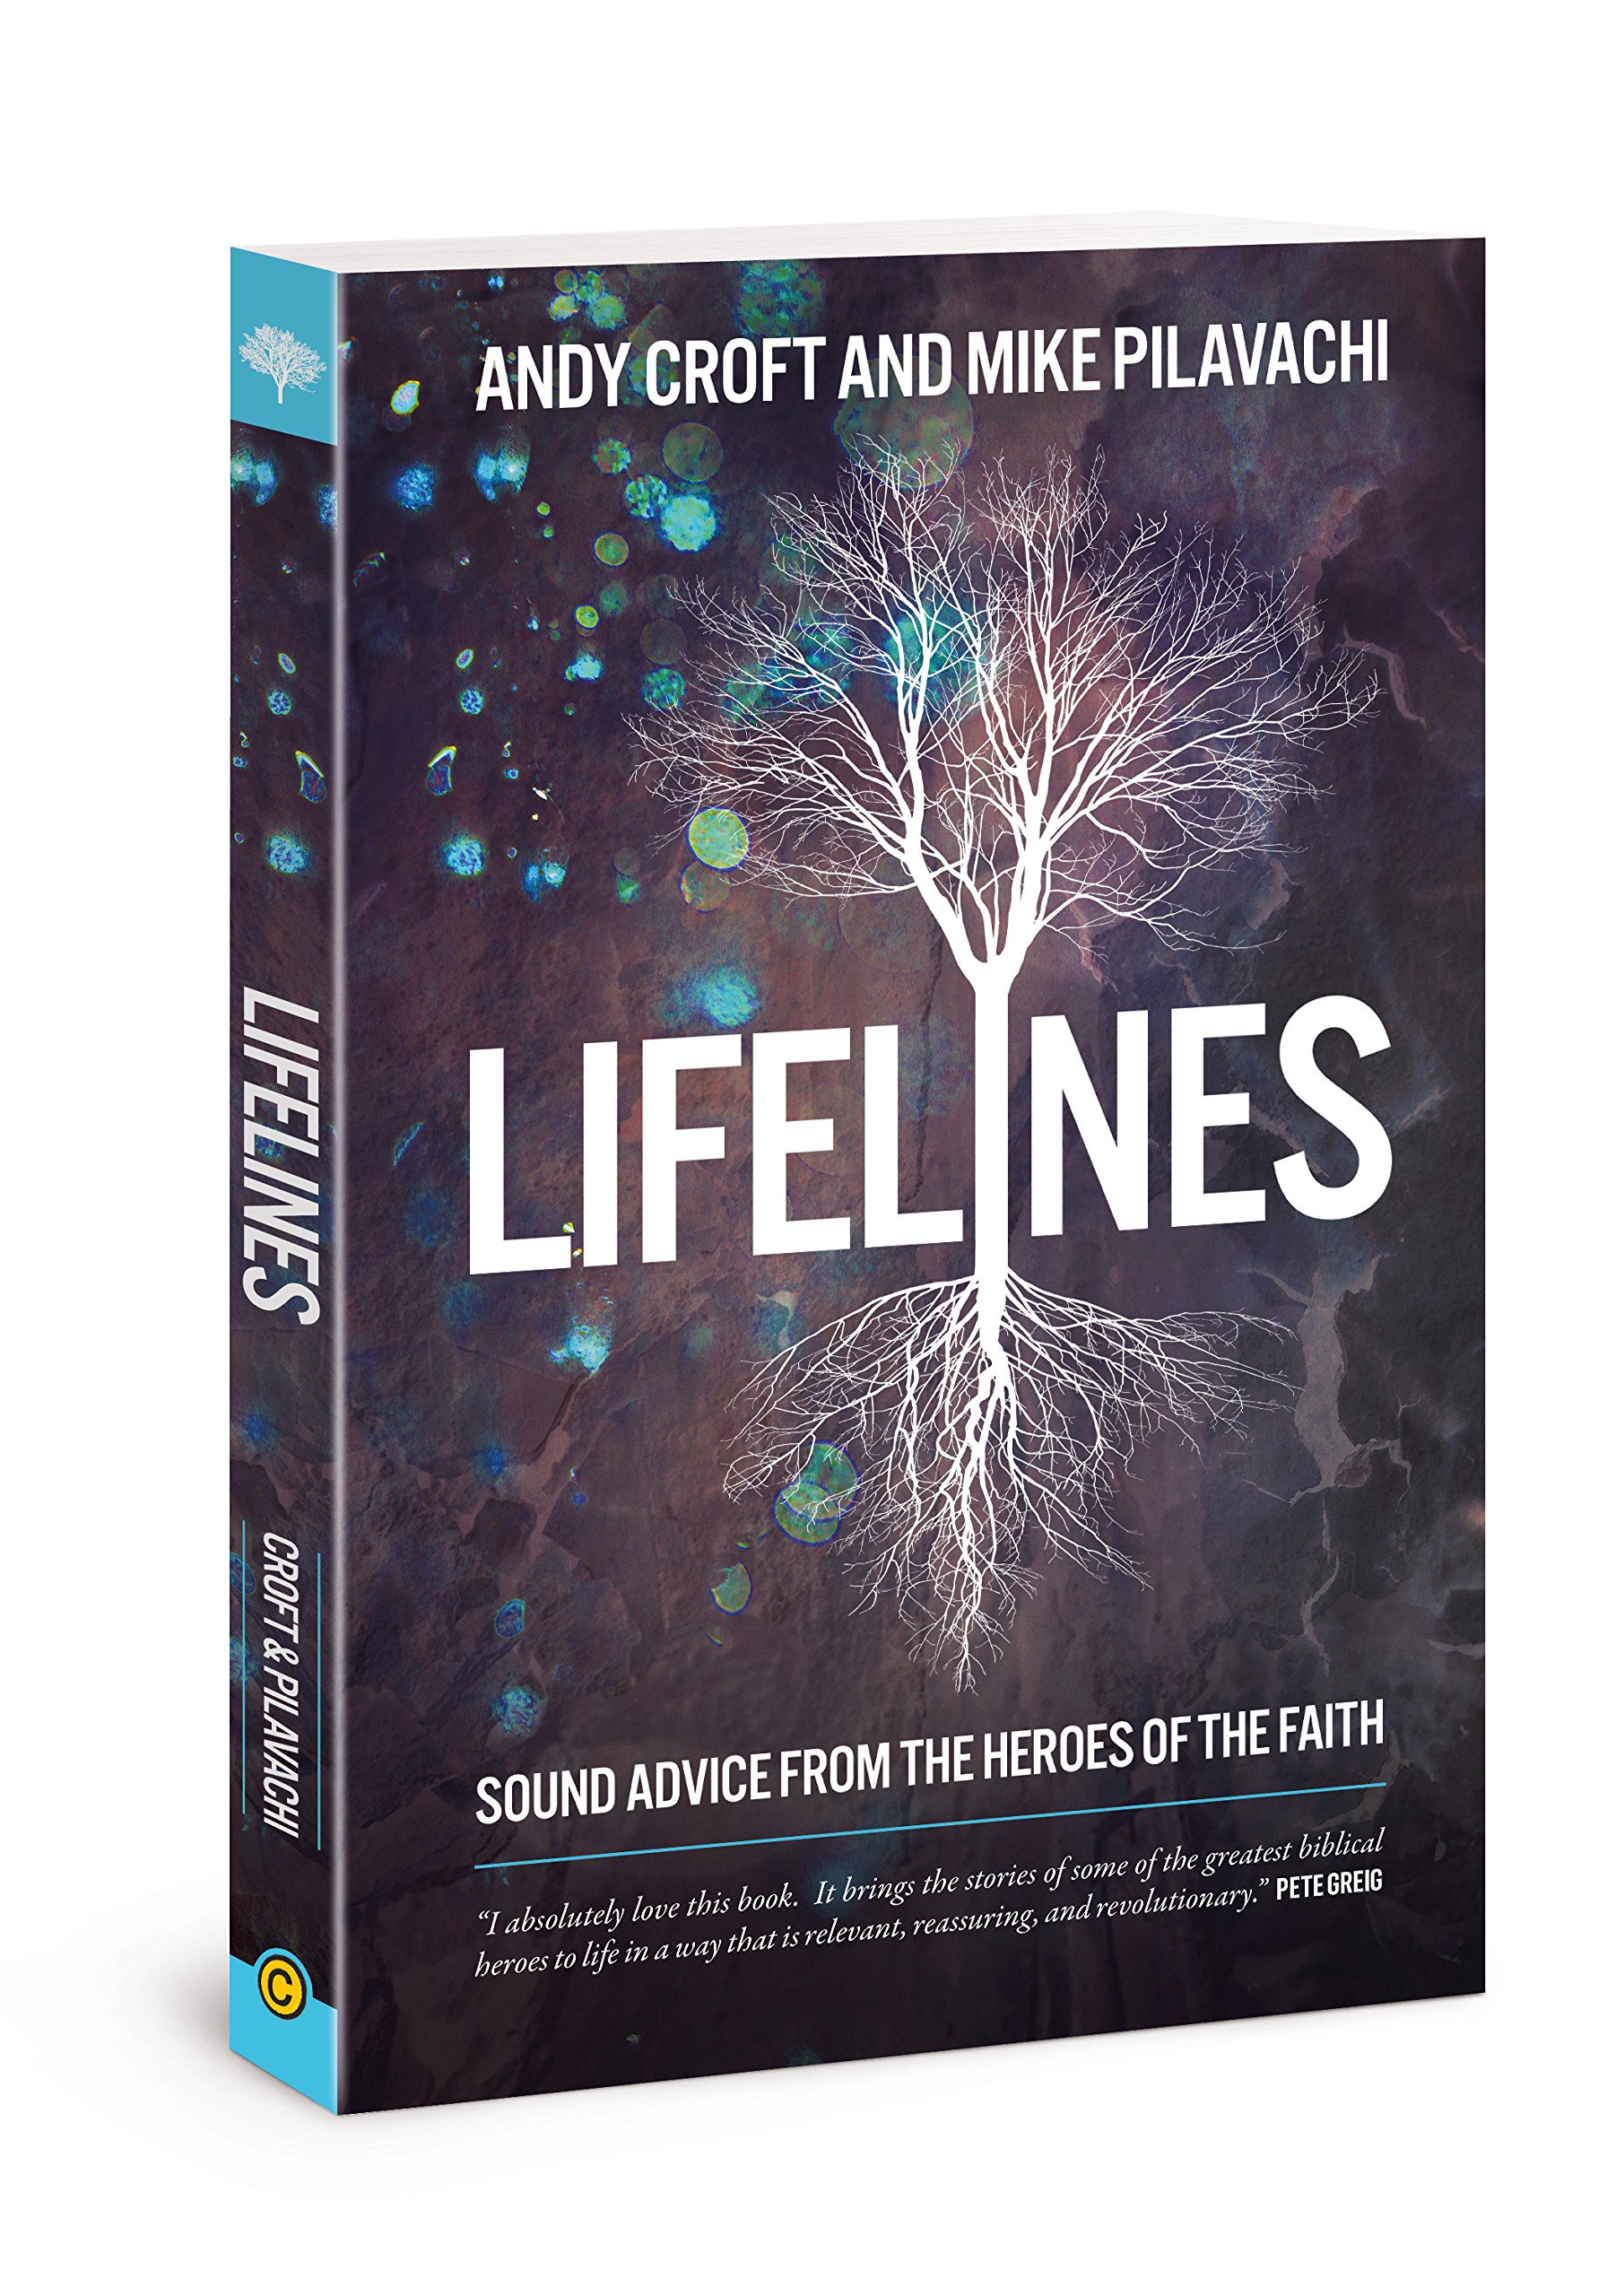 More information on Lifelines Sound Advice From The Heroes Of The Faith